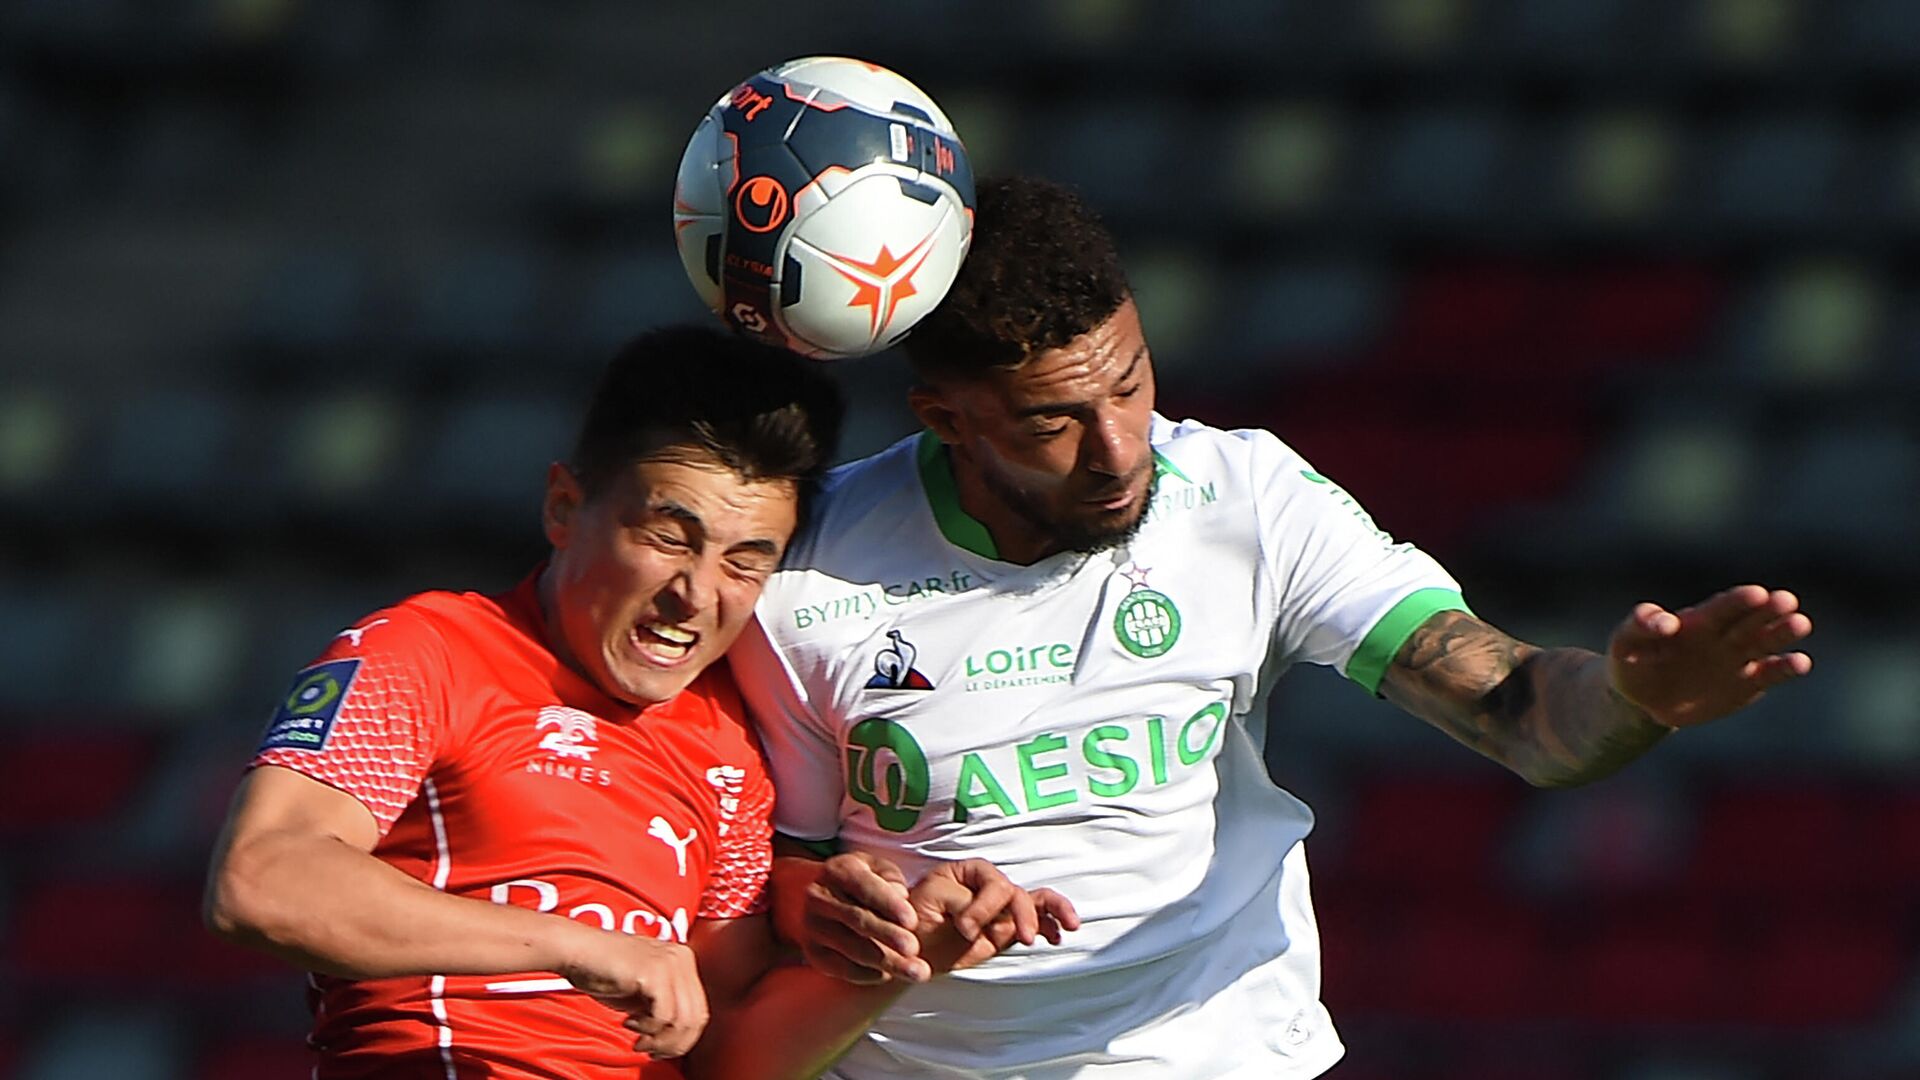 Nimes' Argentine midfielder Andres Cubas (L) fights for the ball with Saint-Etienne's Gabonese forward Denis Bouanga (R) during the French Ligue 1 football match between Nimes Olympique and AS Saint-Etienne (ASSE) at the Costieres stadium in Nimes, Southern France on April 04, 2021. (Photo by Sylvain THOMAS / AFP) - РИА Новости, 1920, 04.04.2021